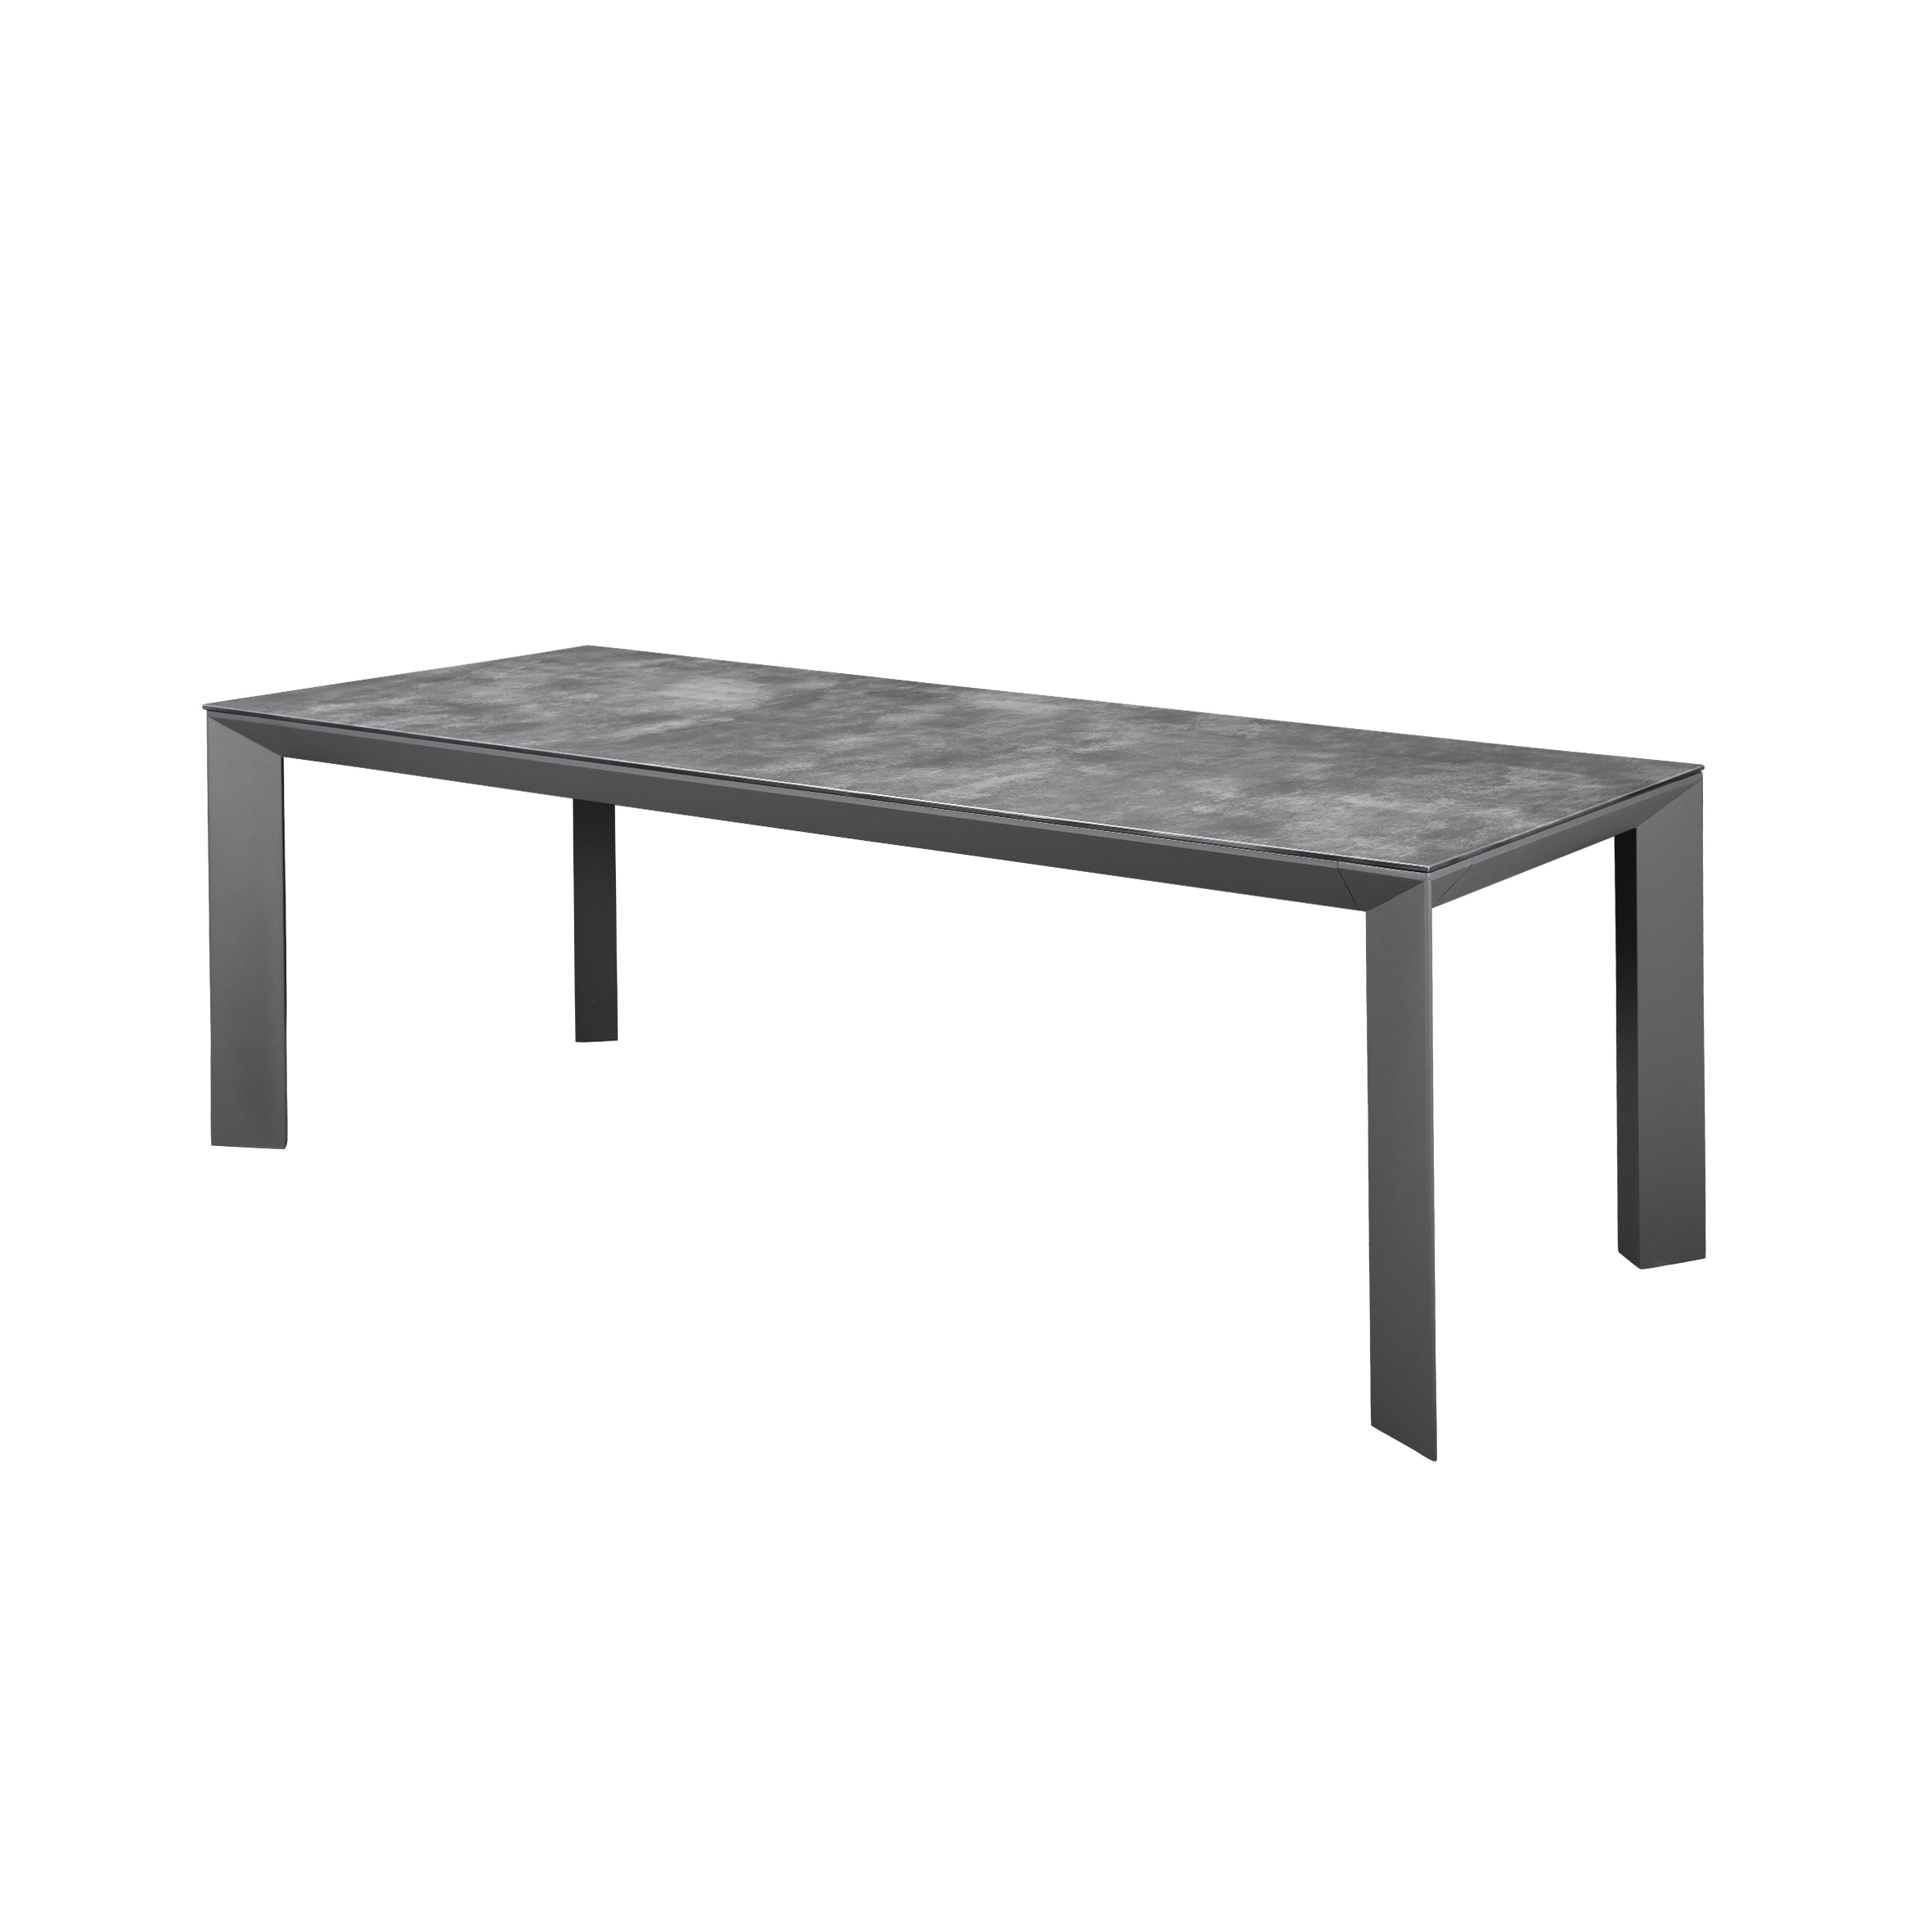 Zeus rectangle dining table S1